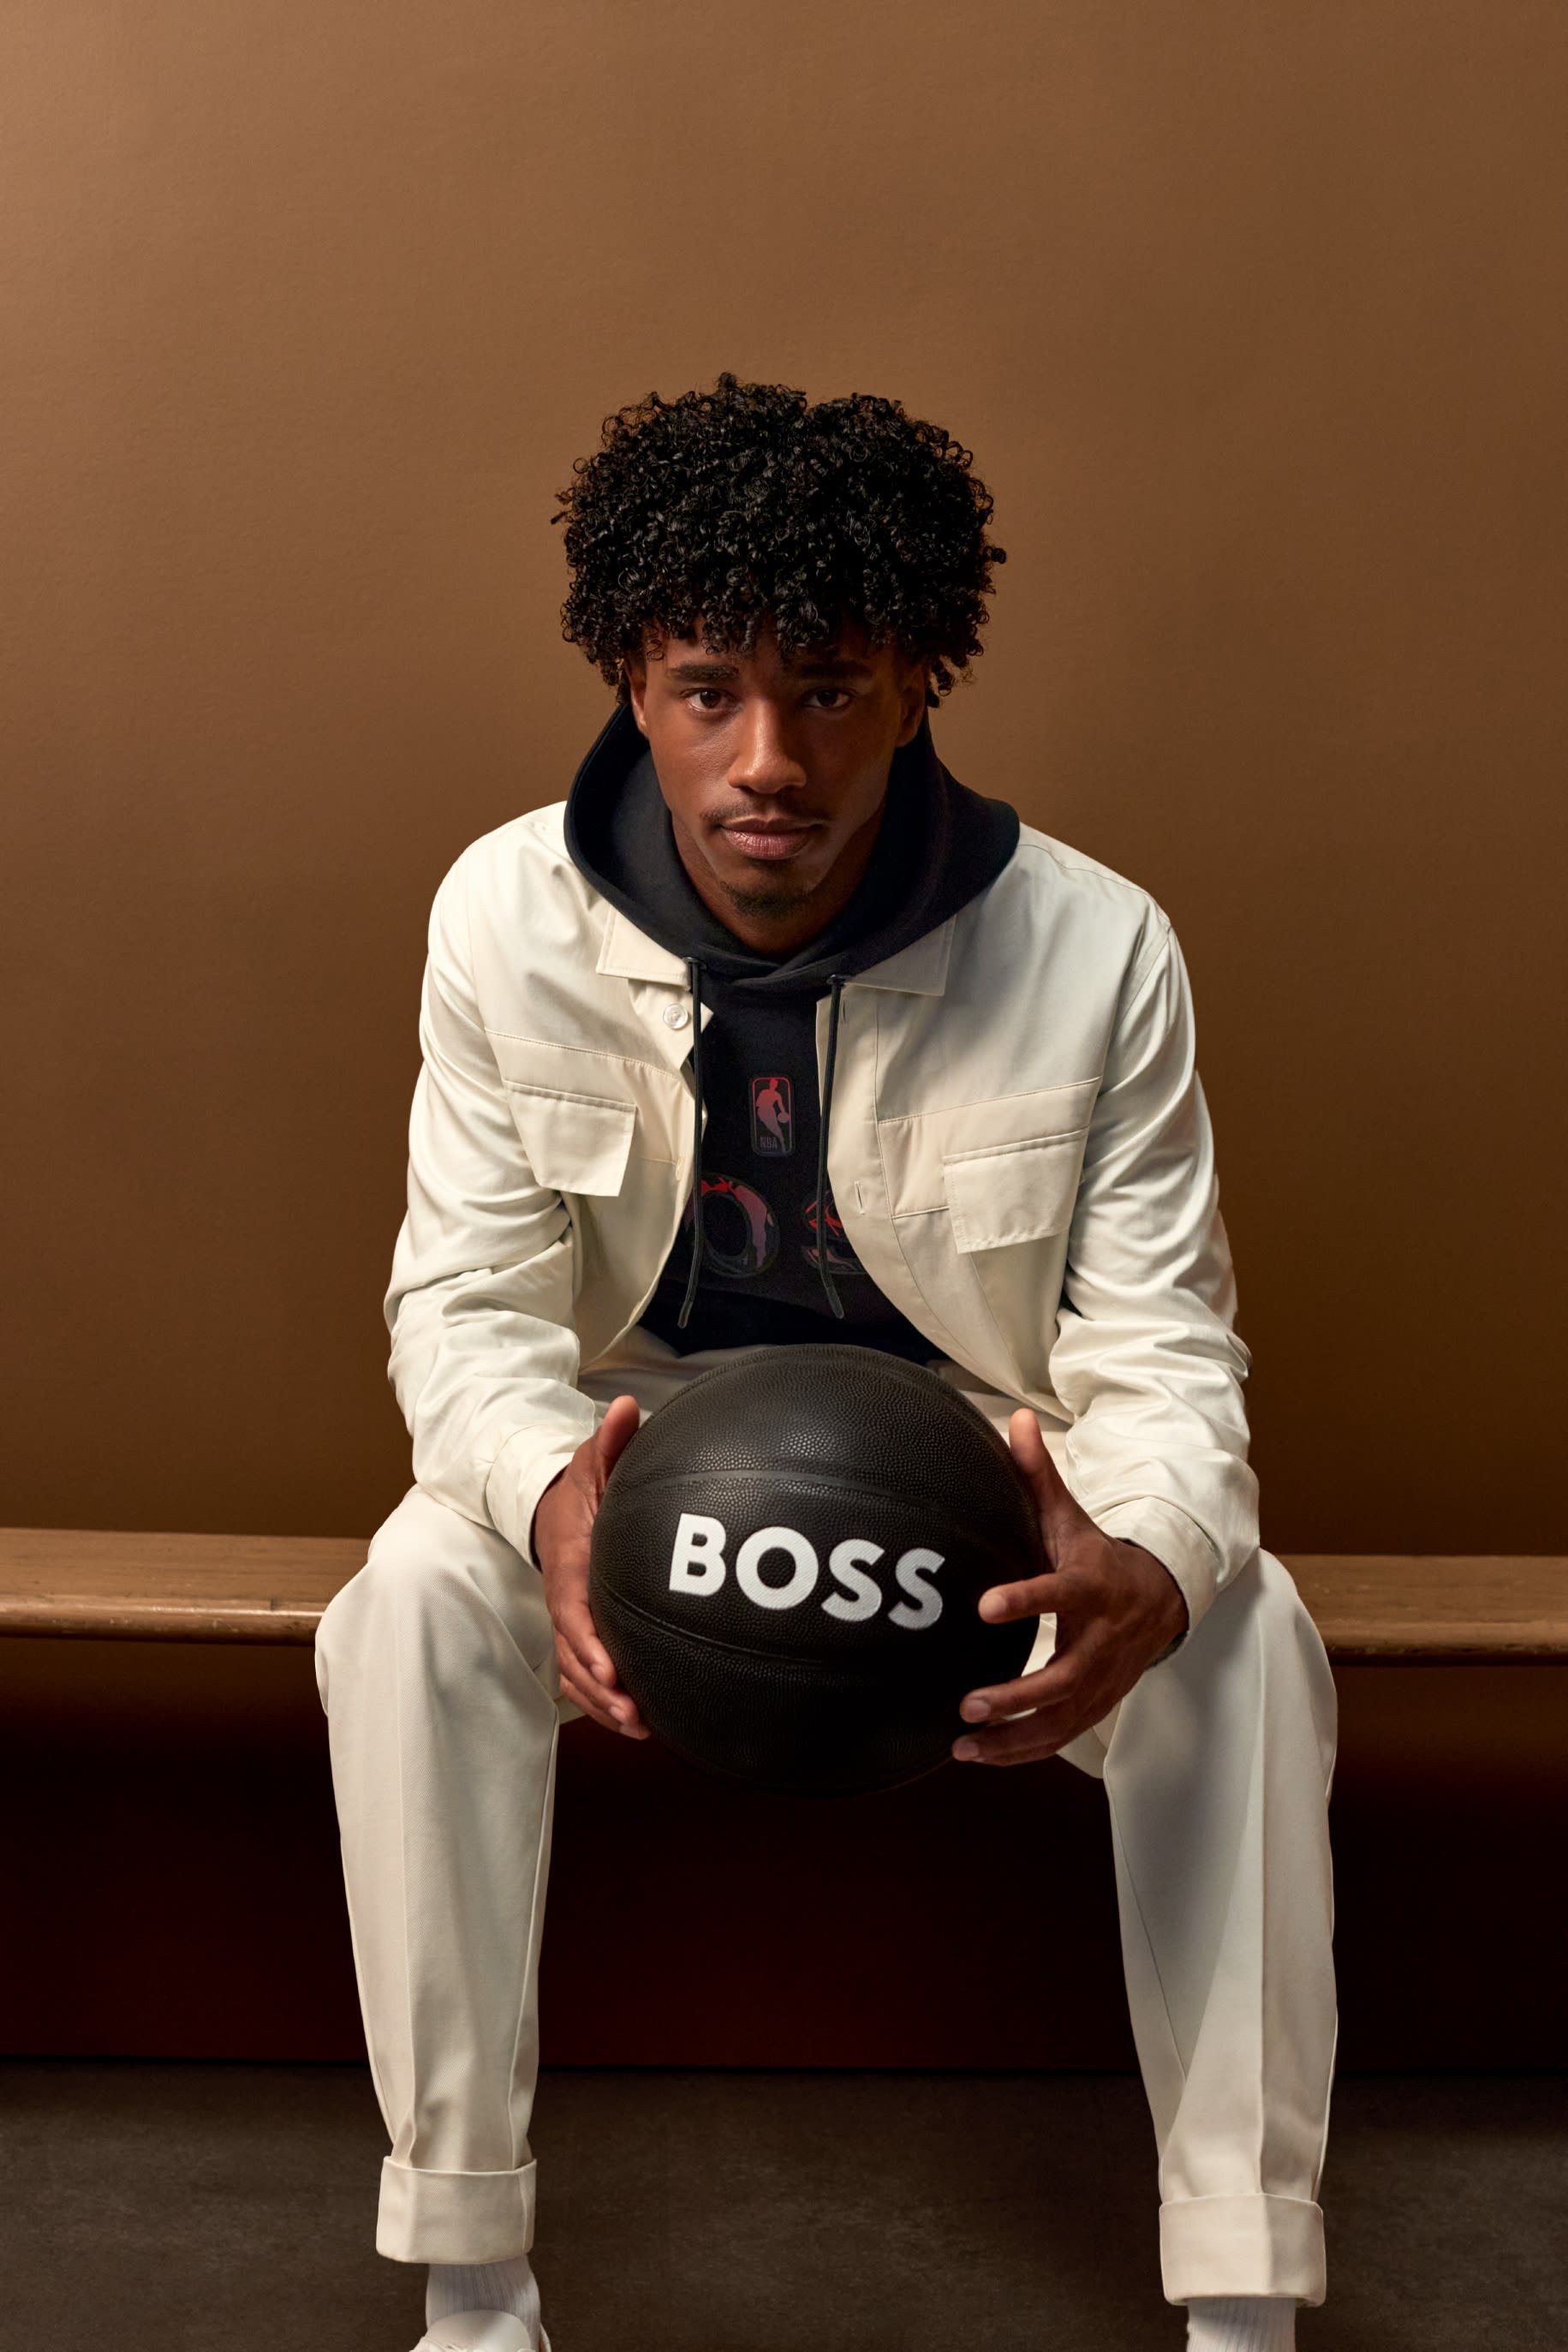 Take your NBA team spirit to the next level with these casual pieces from  the BOSS x NBA capsule. Check out the entire collection here.